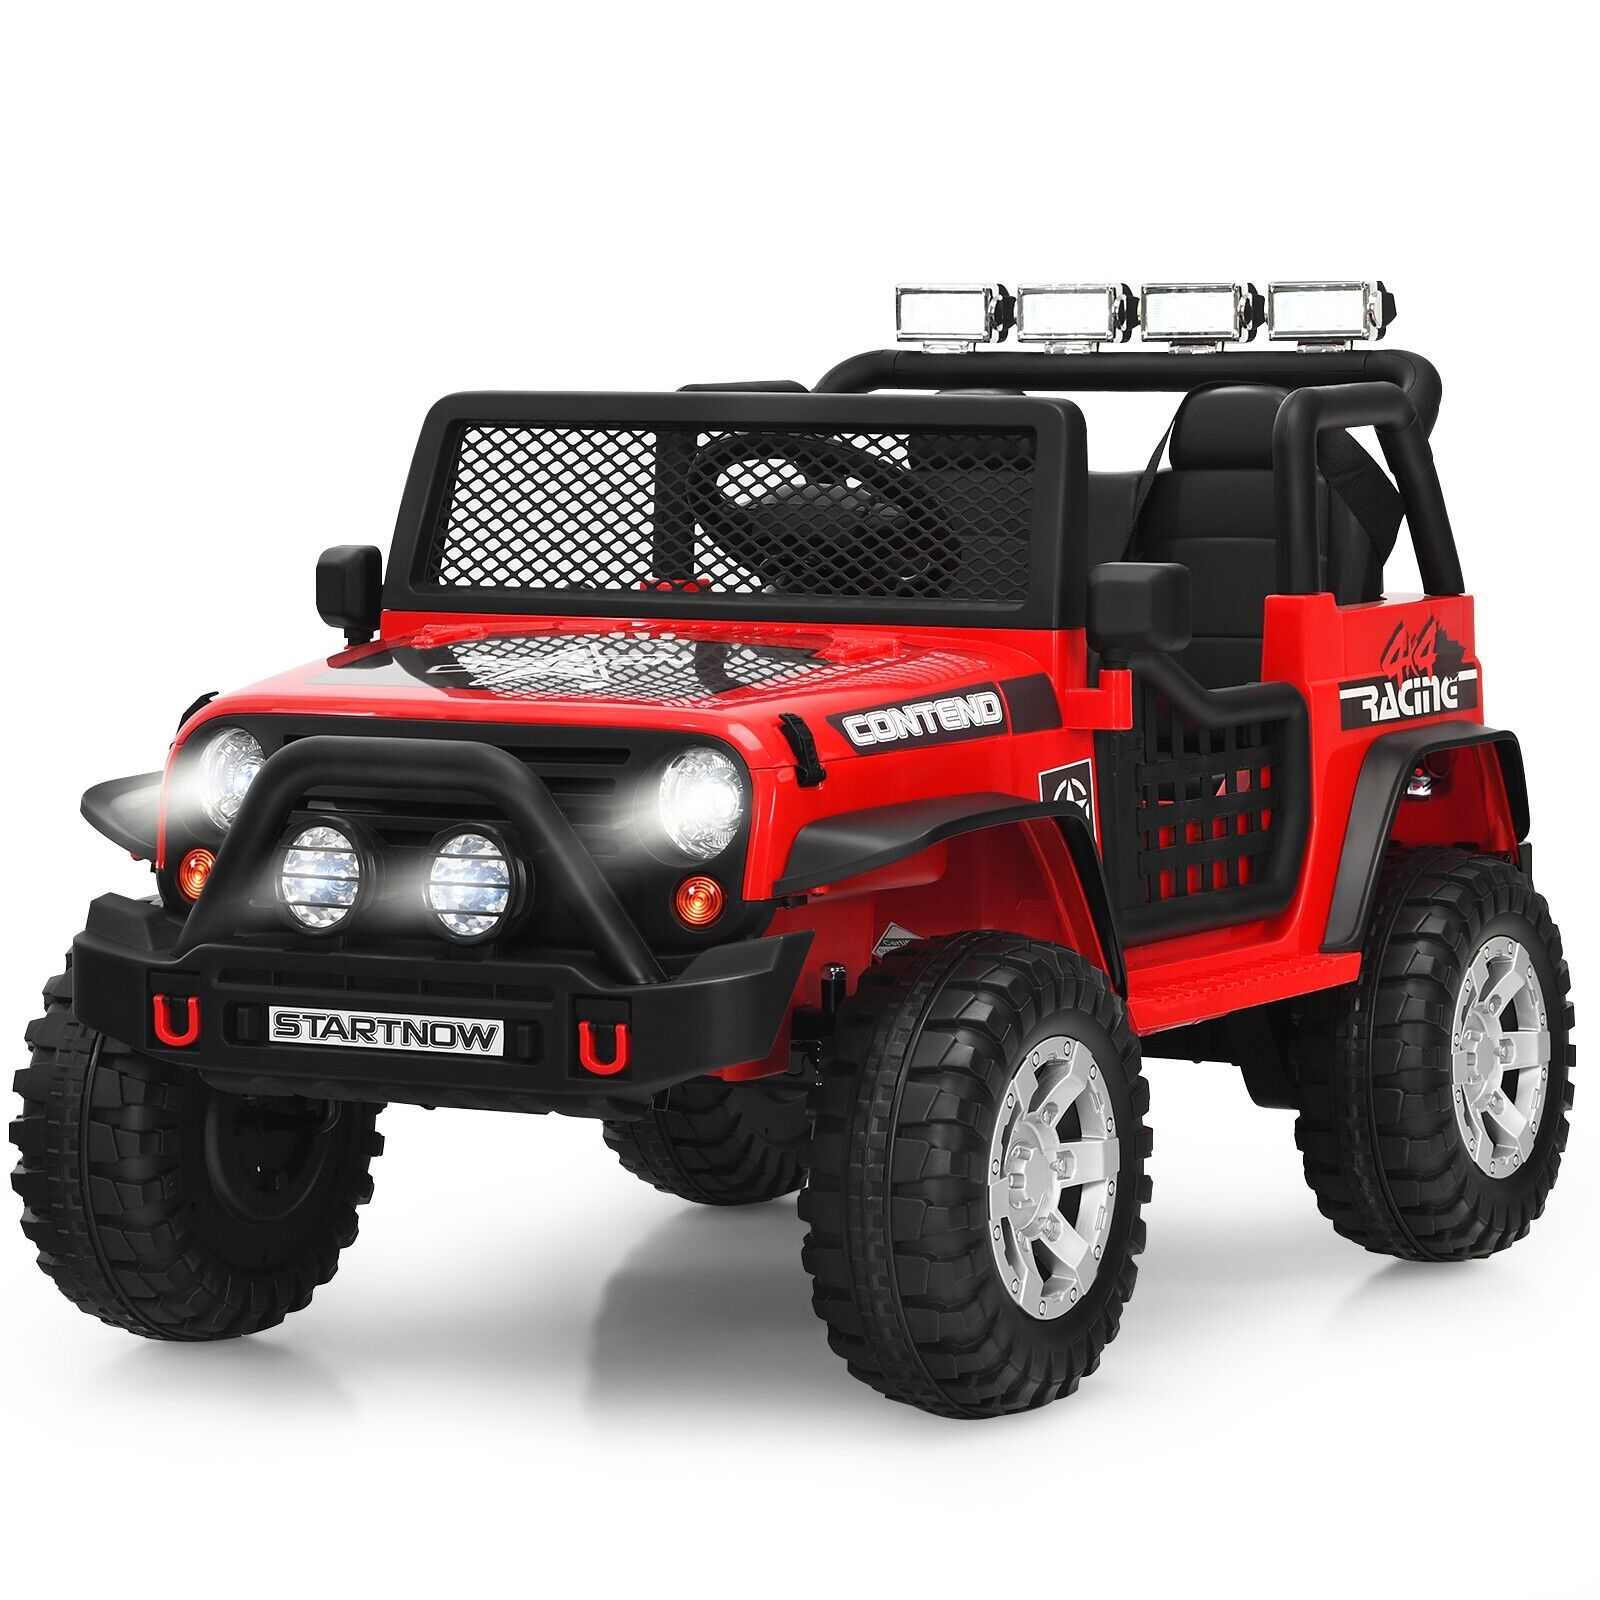 2-Seat Kids Ride on Truck with Parent Remote Control-Red